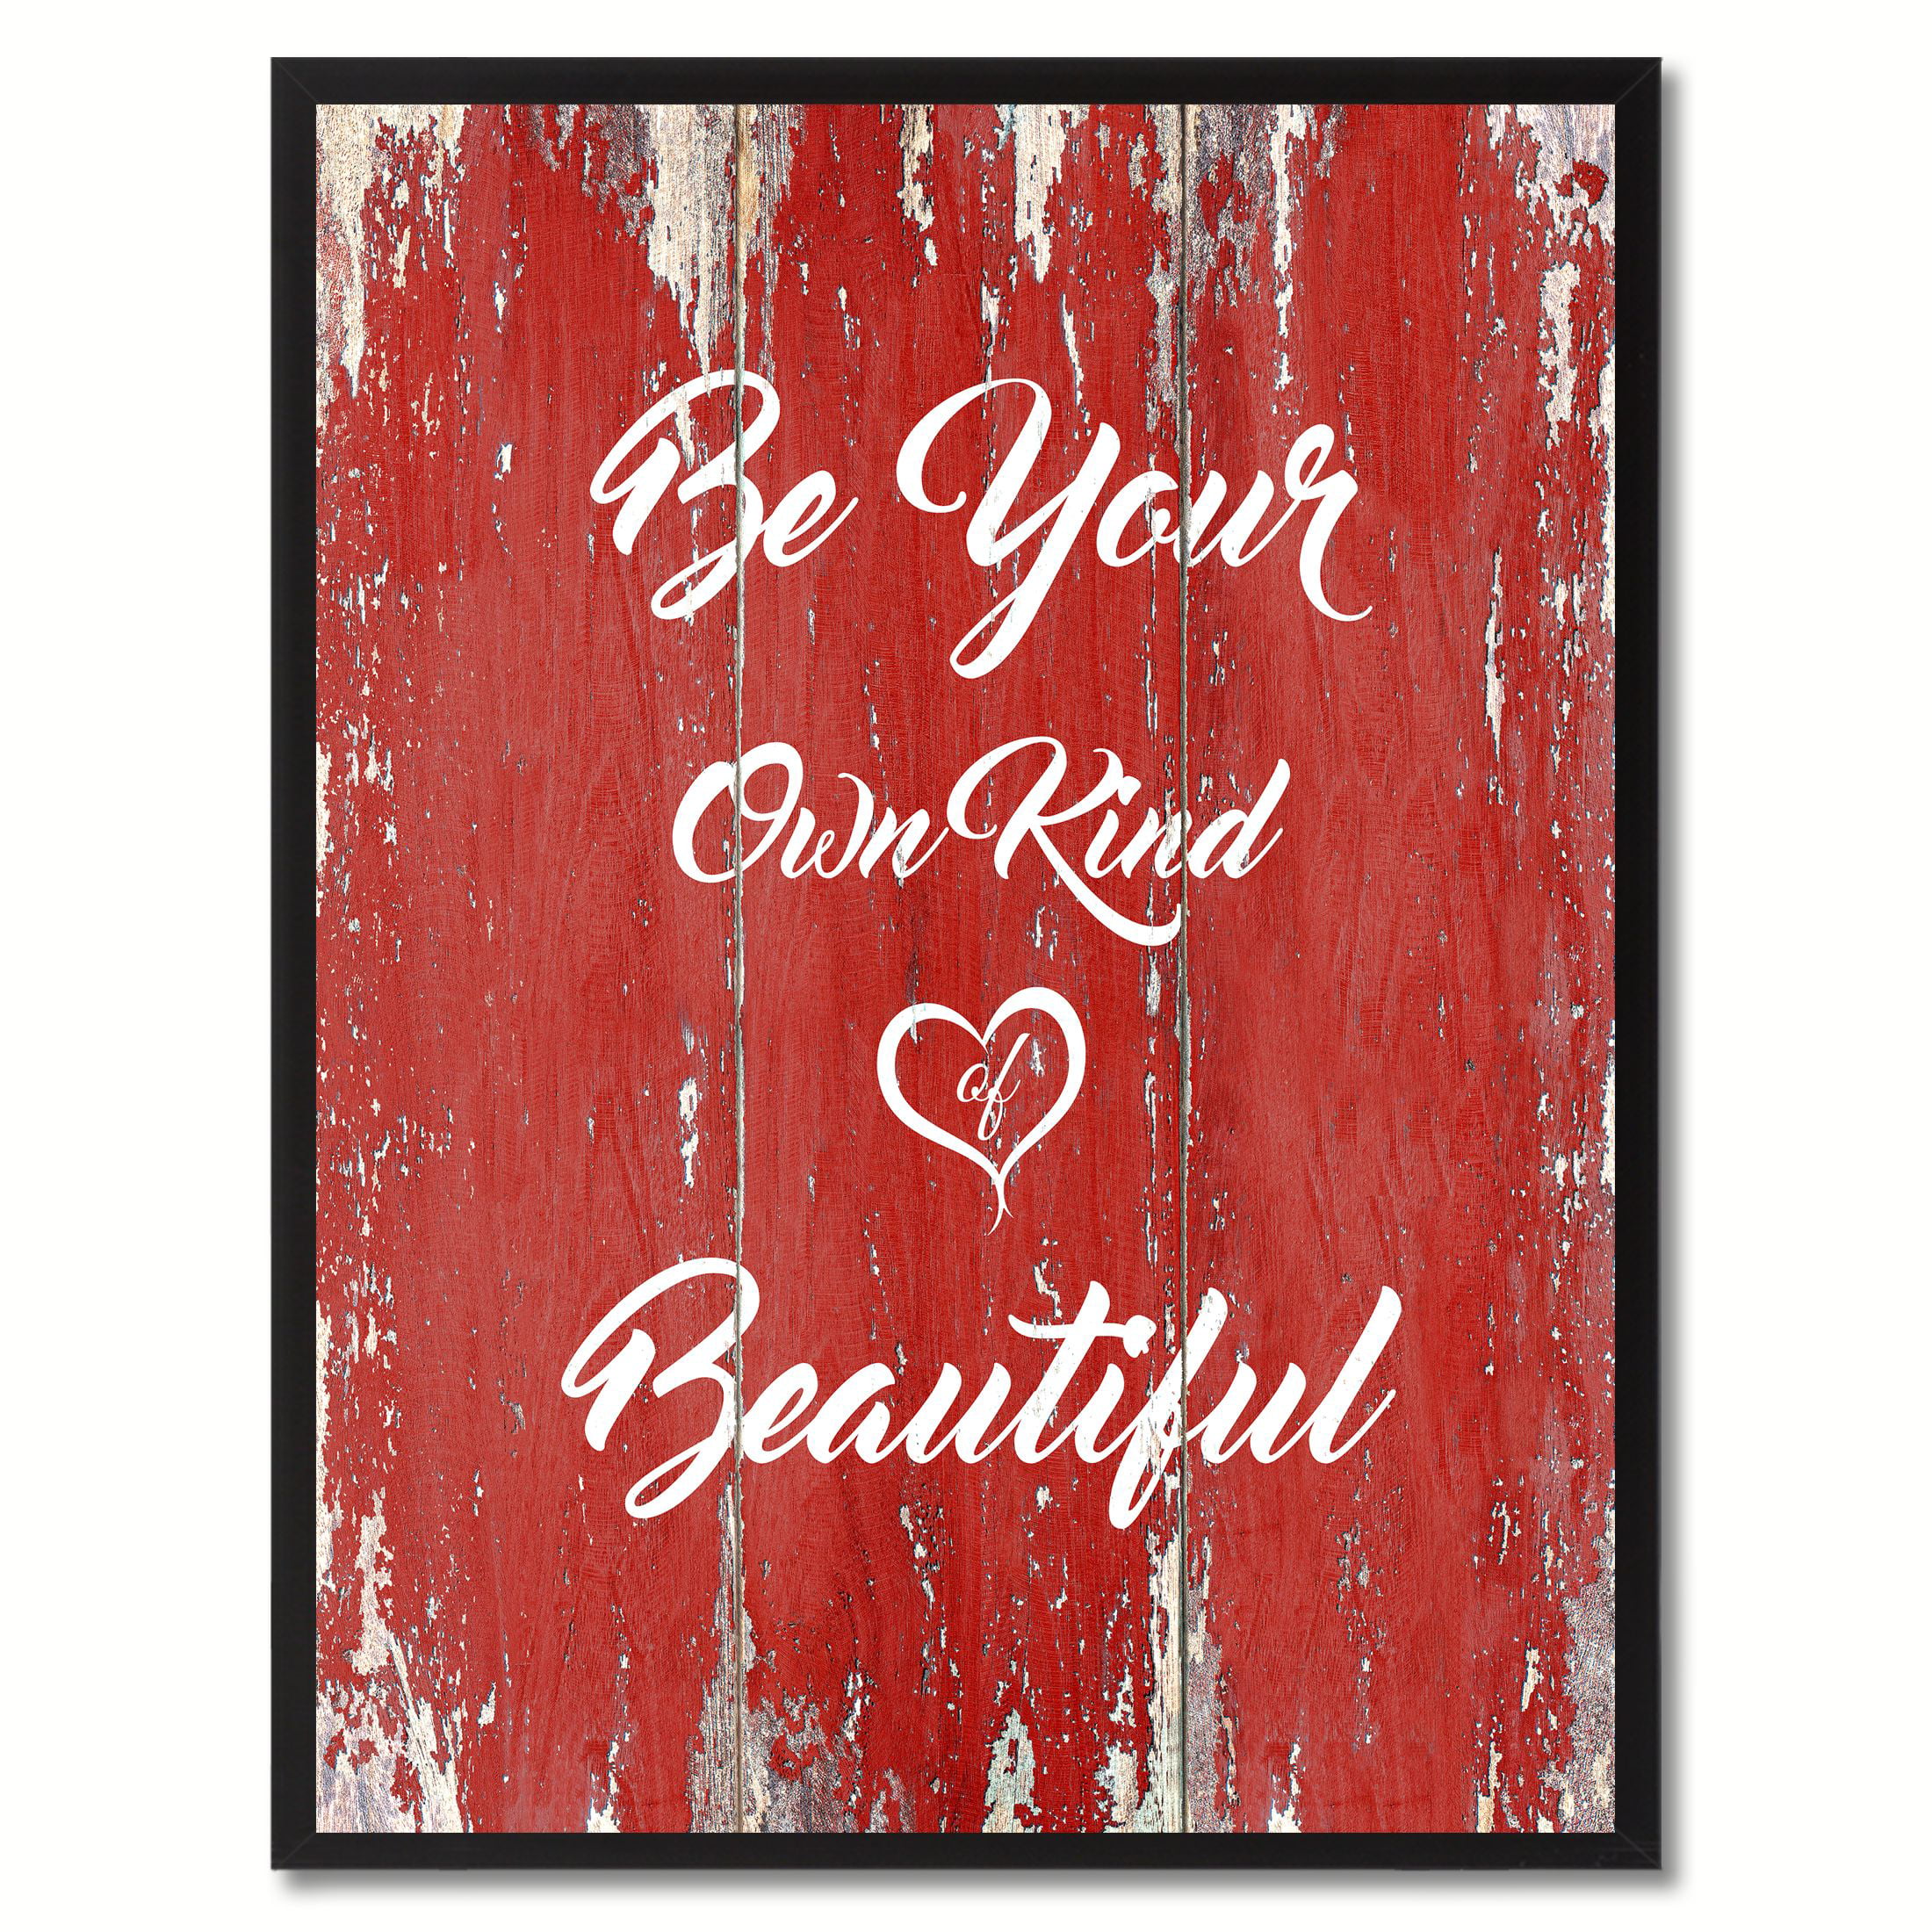 Be Your Own Kind Of Beautiful Motivation Quote Saying Canvas Print Picture Frame Home Decor Wall Art Gift Ideas